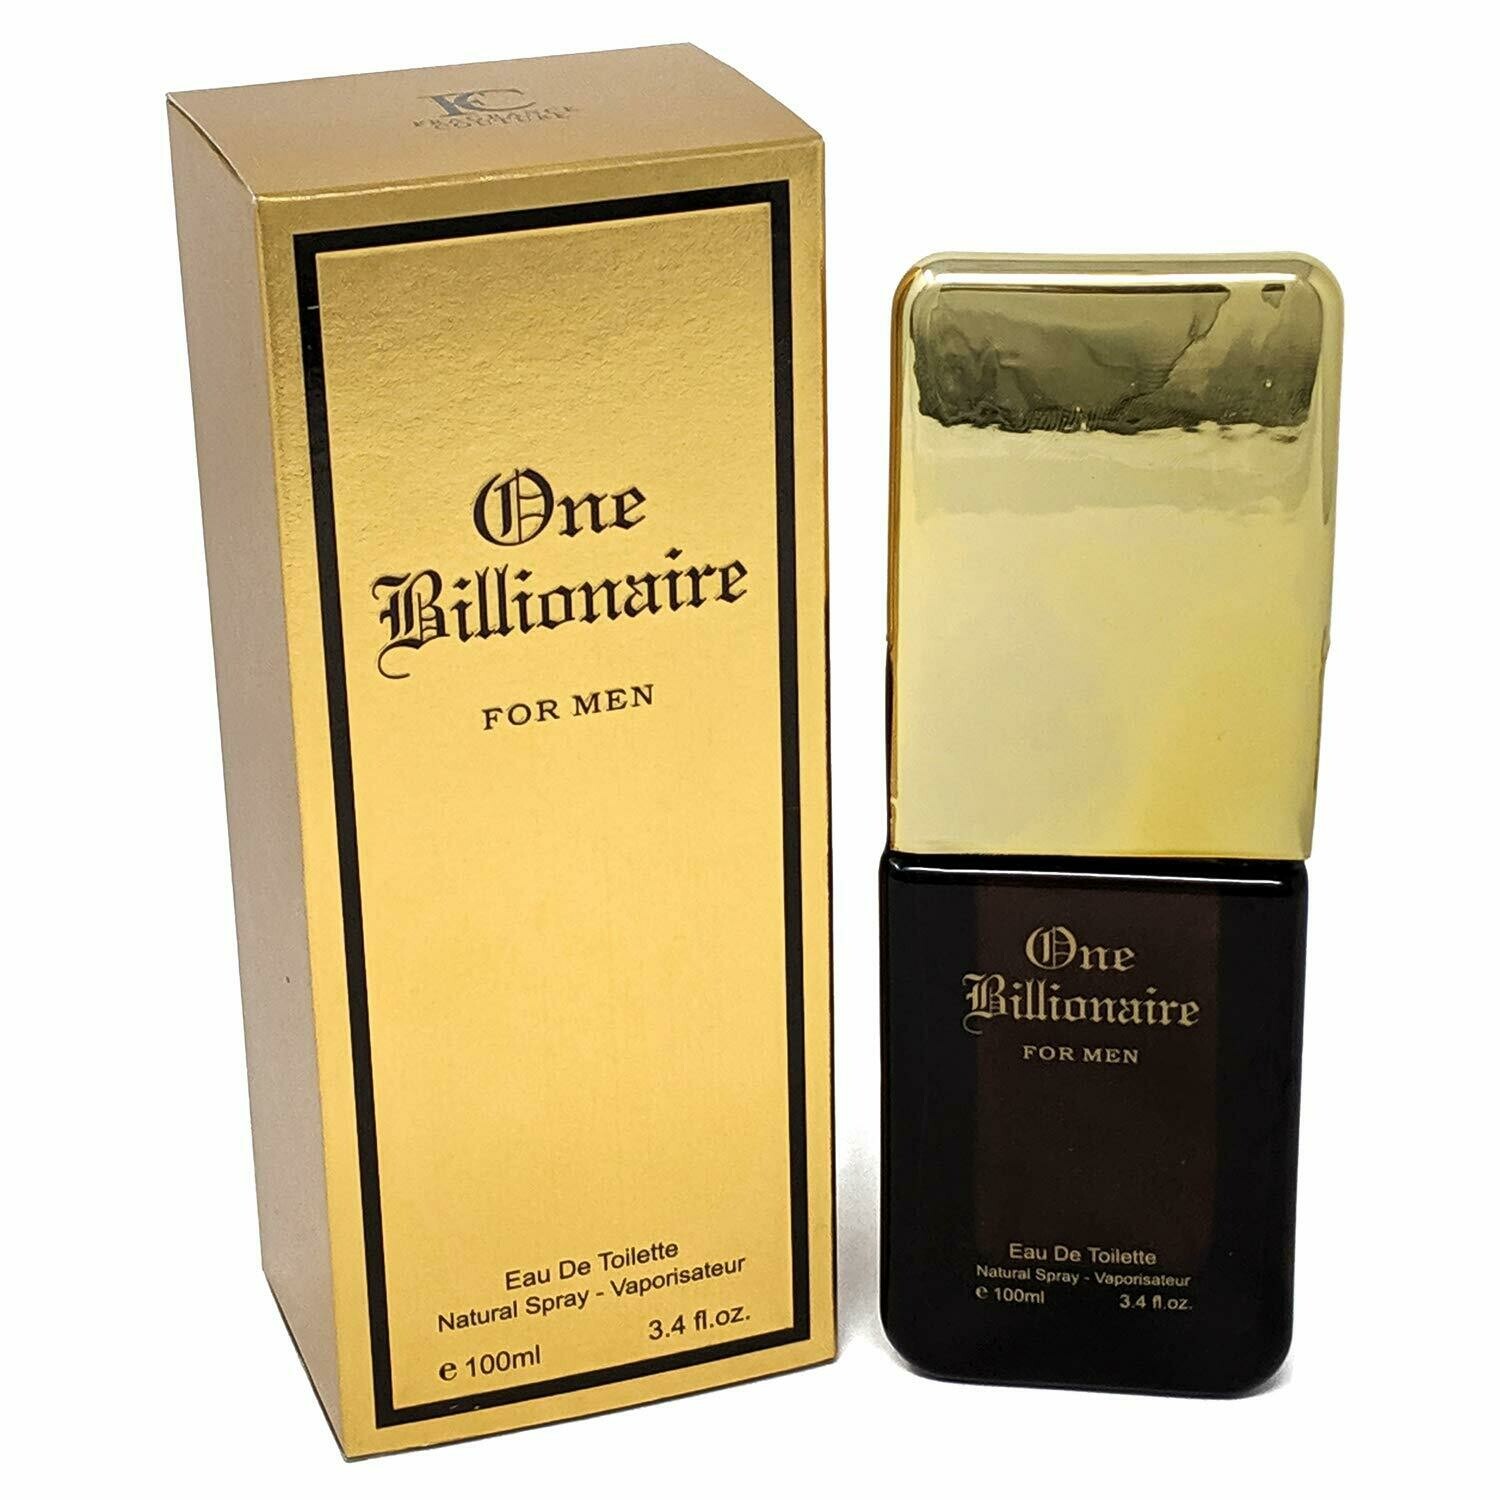 J&H ONE BILLIONAIRE, Eau de Toilette Spray for Men, Wonderful Gift,  Energetic, Daytime and Casual Use, for all Skin Types, a Classic Bottle,  3.4 Fluid Ounce